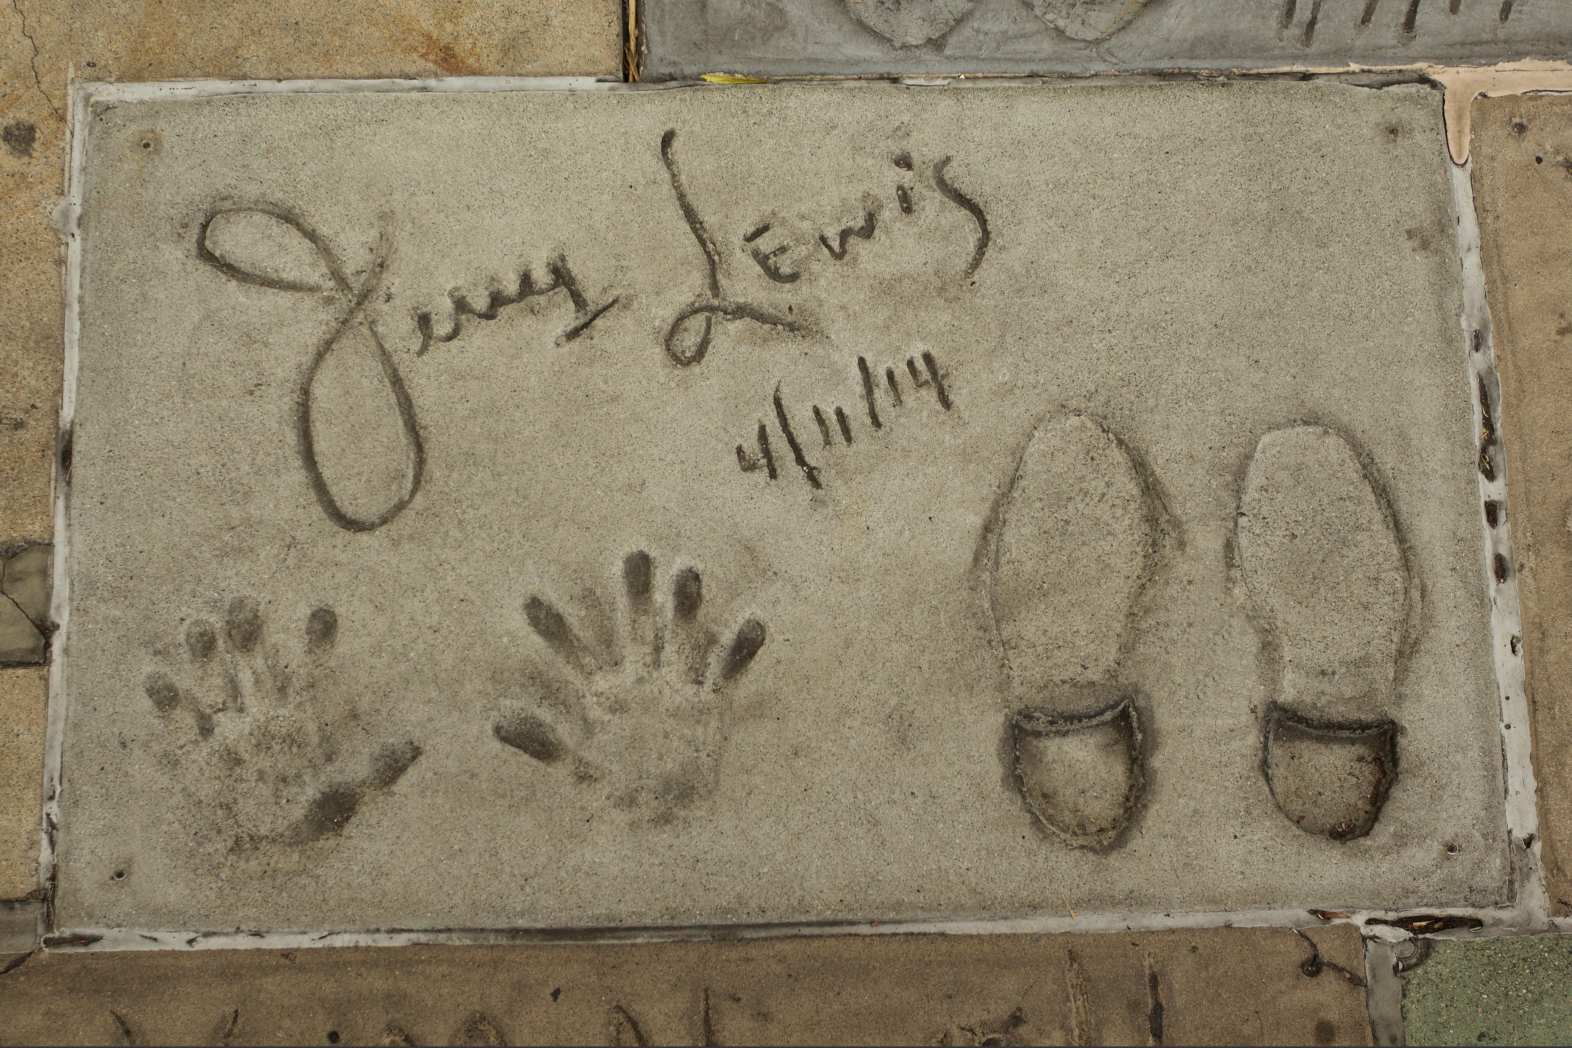 A makeshift memorial appeared for late comedian, actor and legendary entertainer Jerry Lewis around his hand and feet prints on the Hollywood Walk of Fame in Los Angeles when he died in 2017.